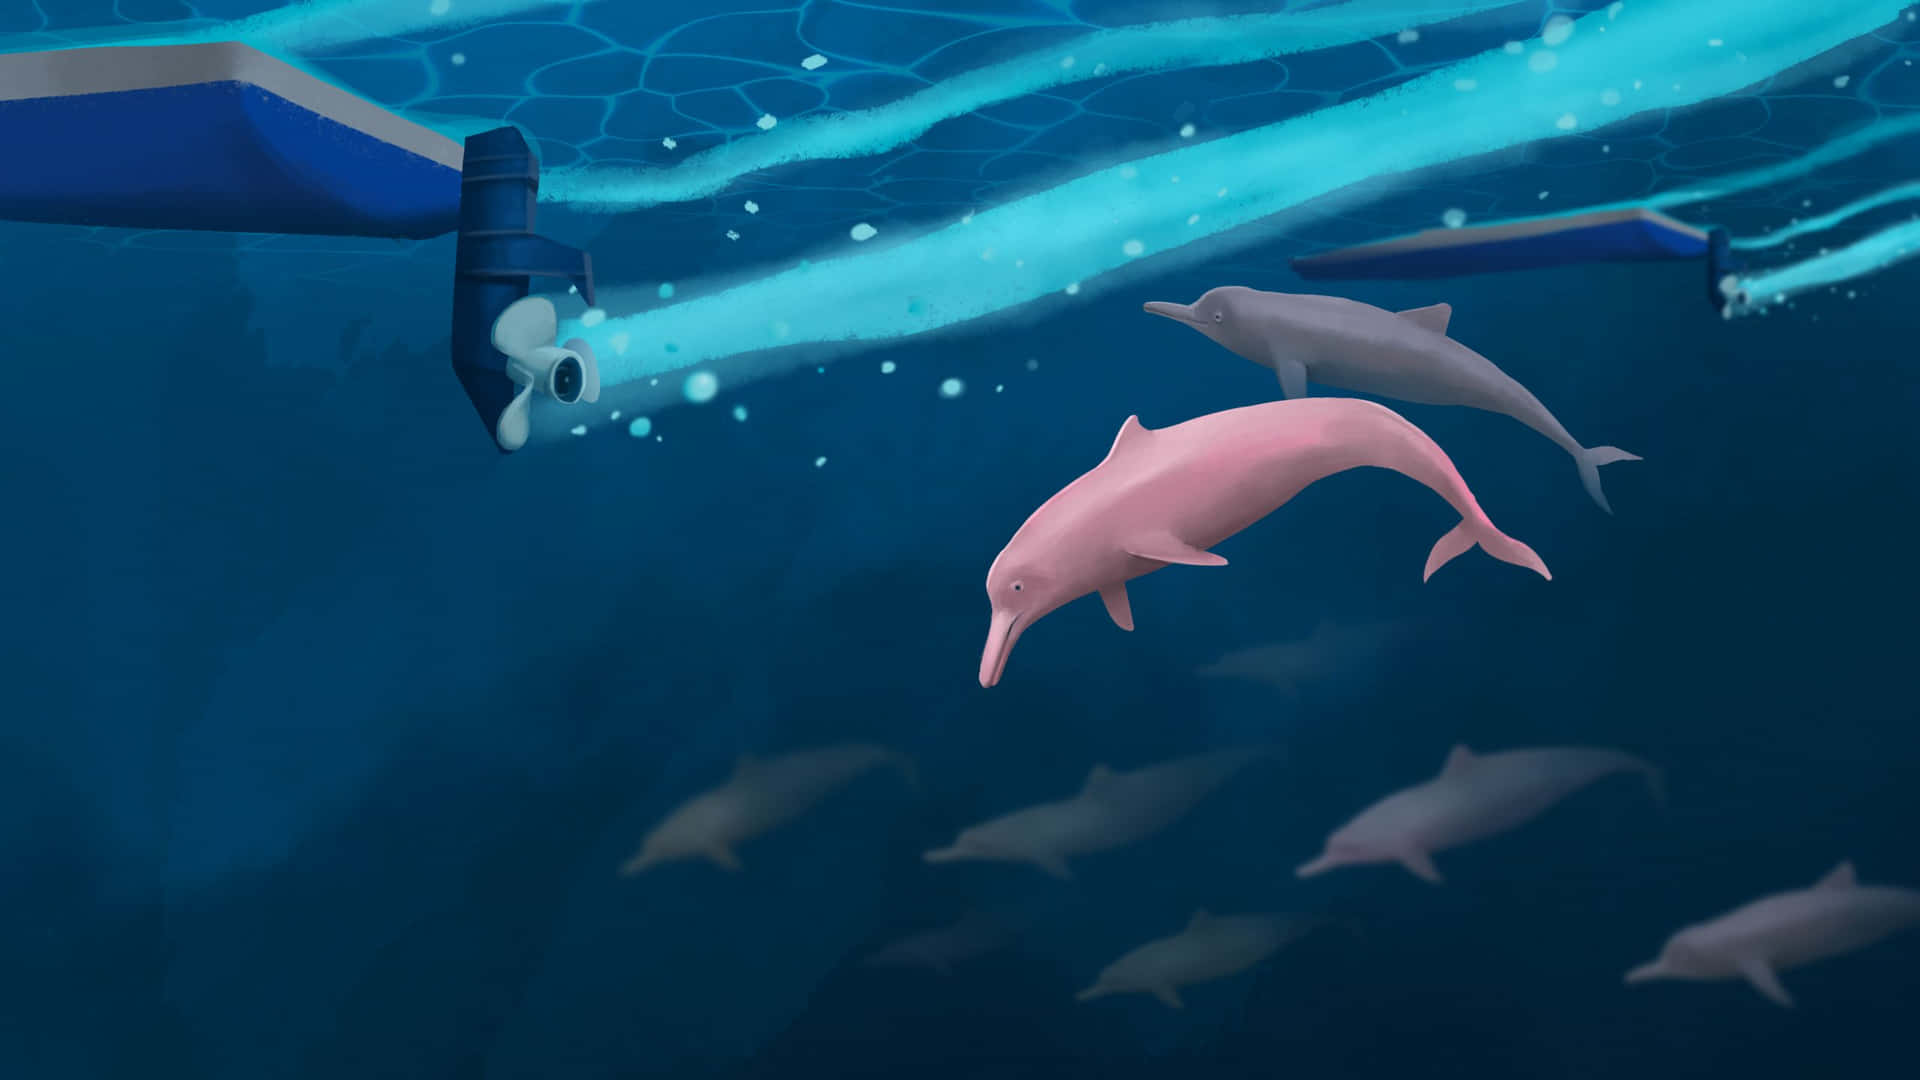 Dolphins Swimming In The Ocean With A Robot